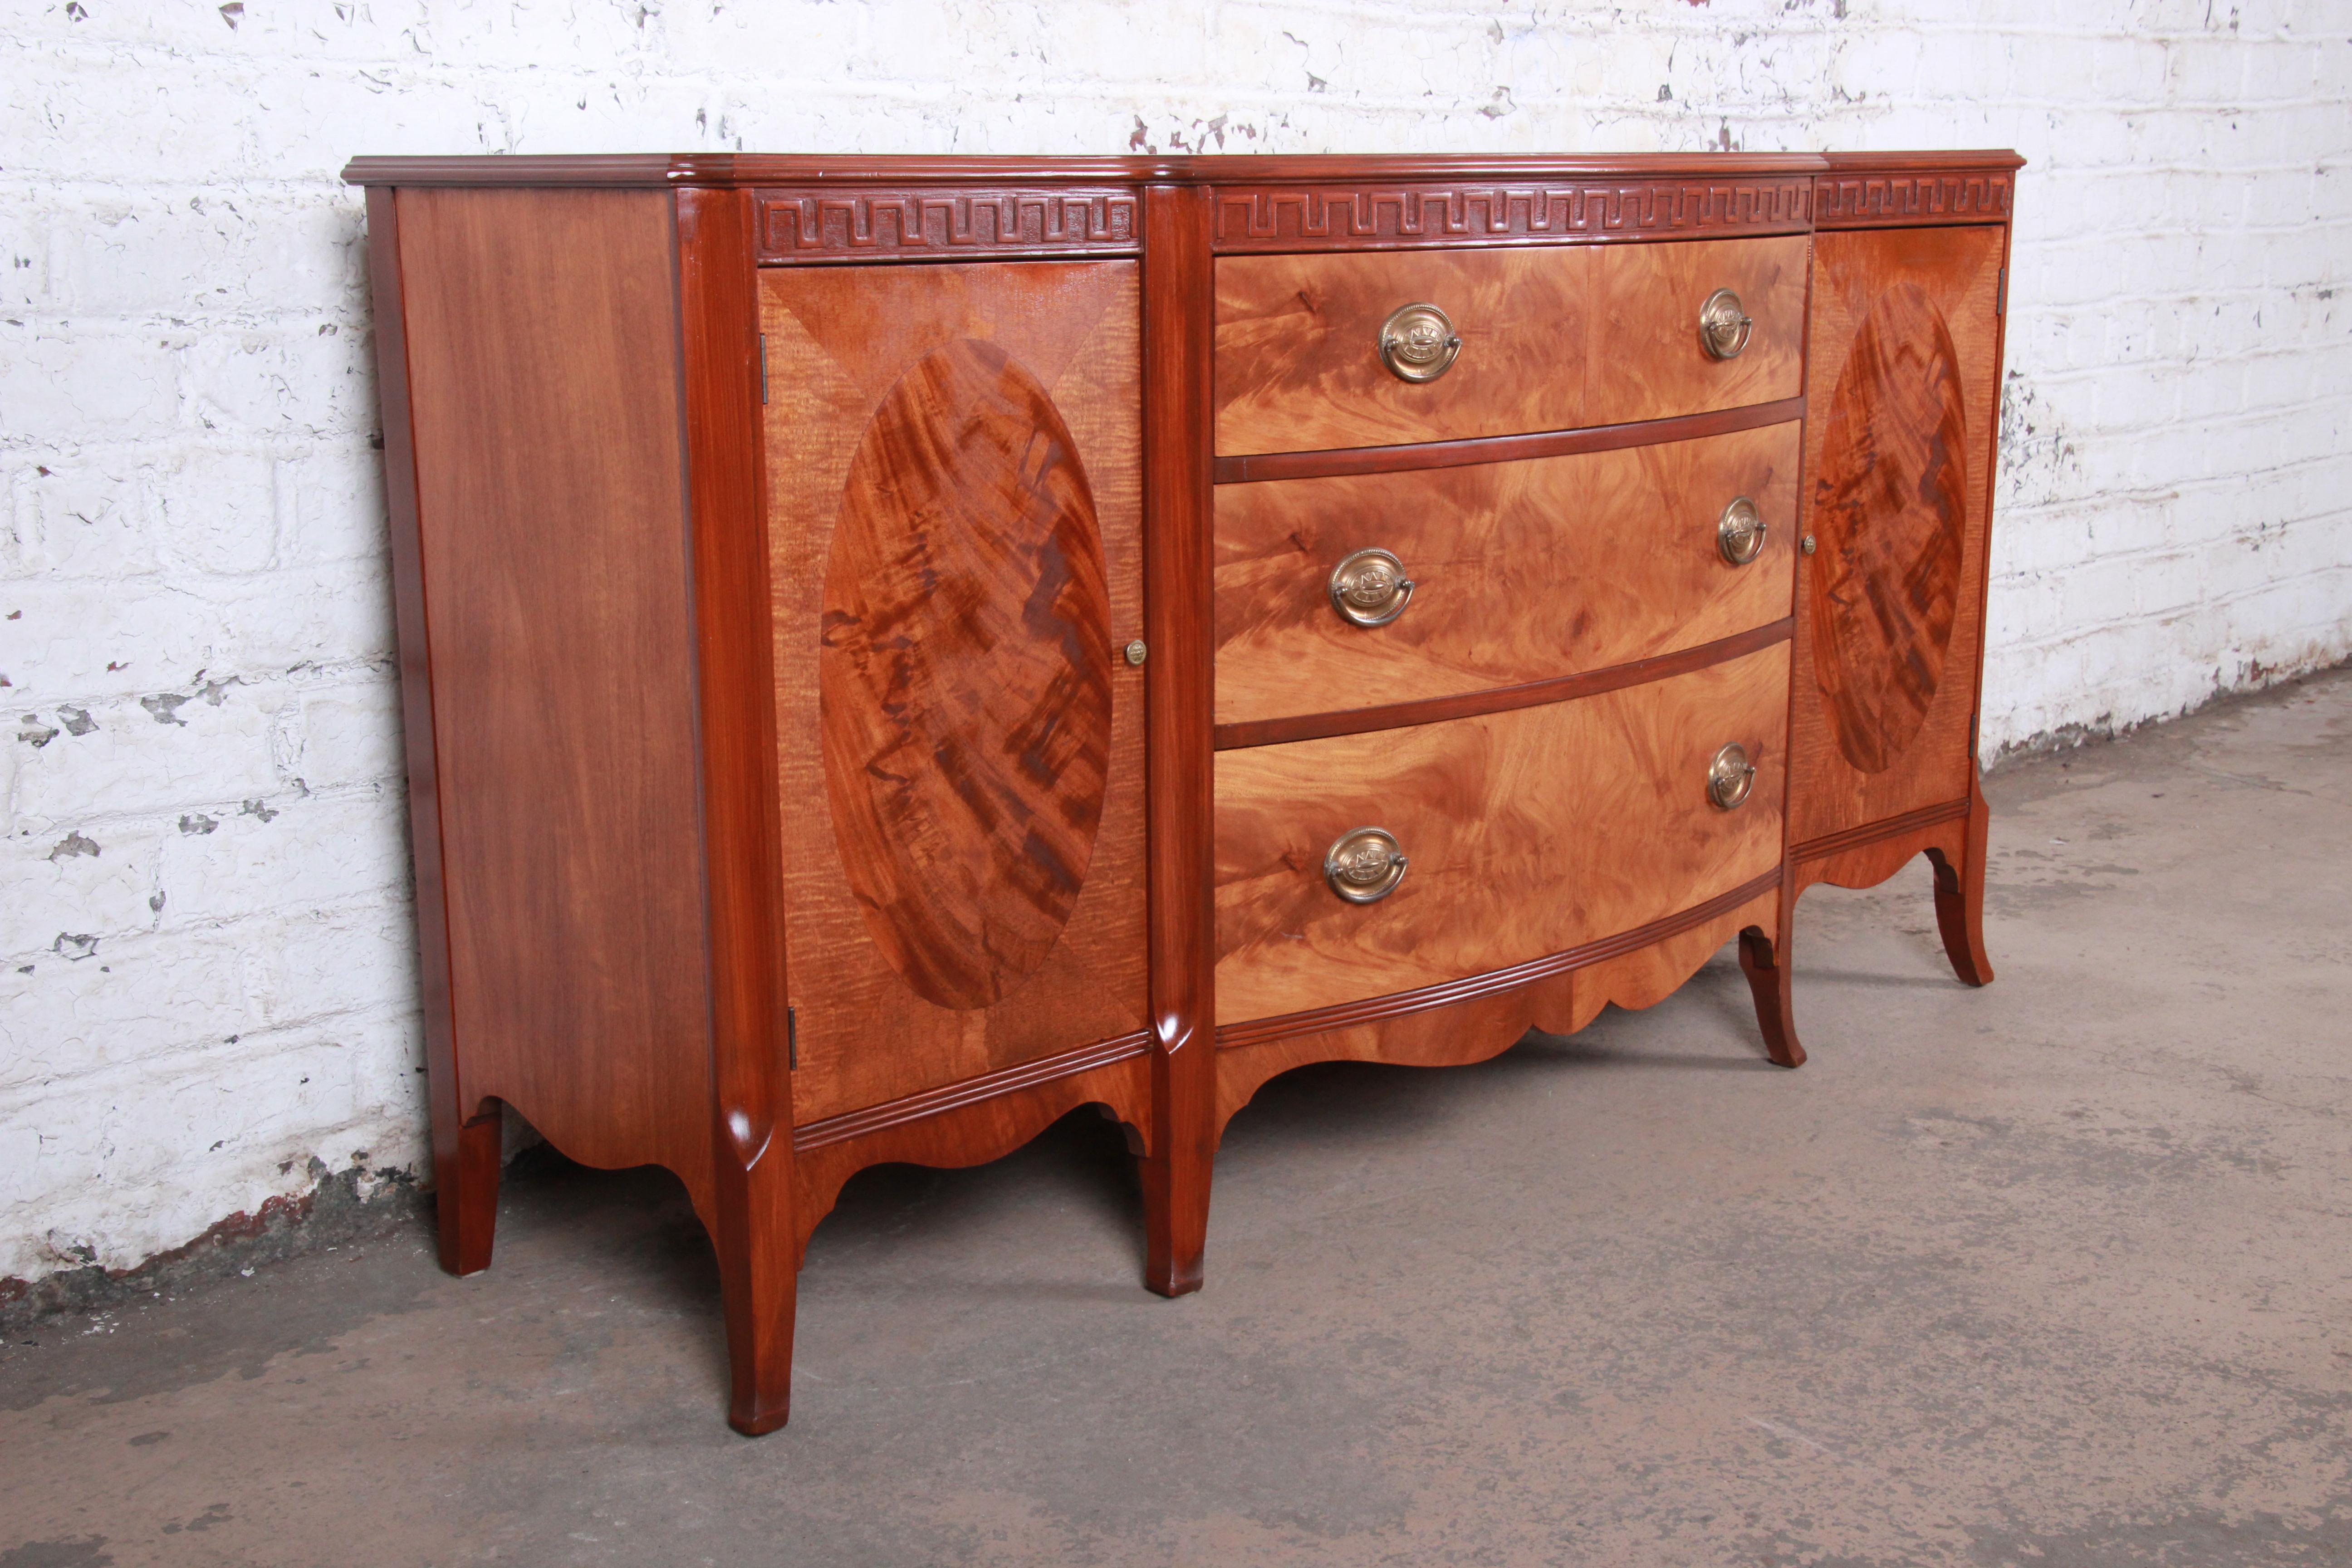 French Provincial Romweber Mahogany and Burl Sideboard Credenza or Bar Cabinet, Newly Refinished